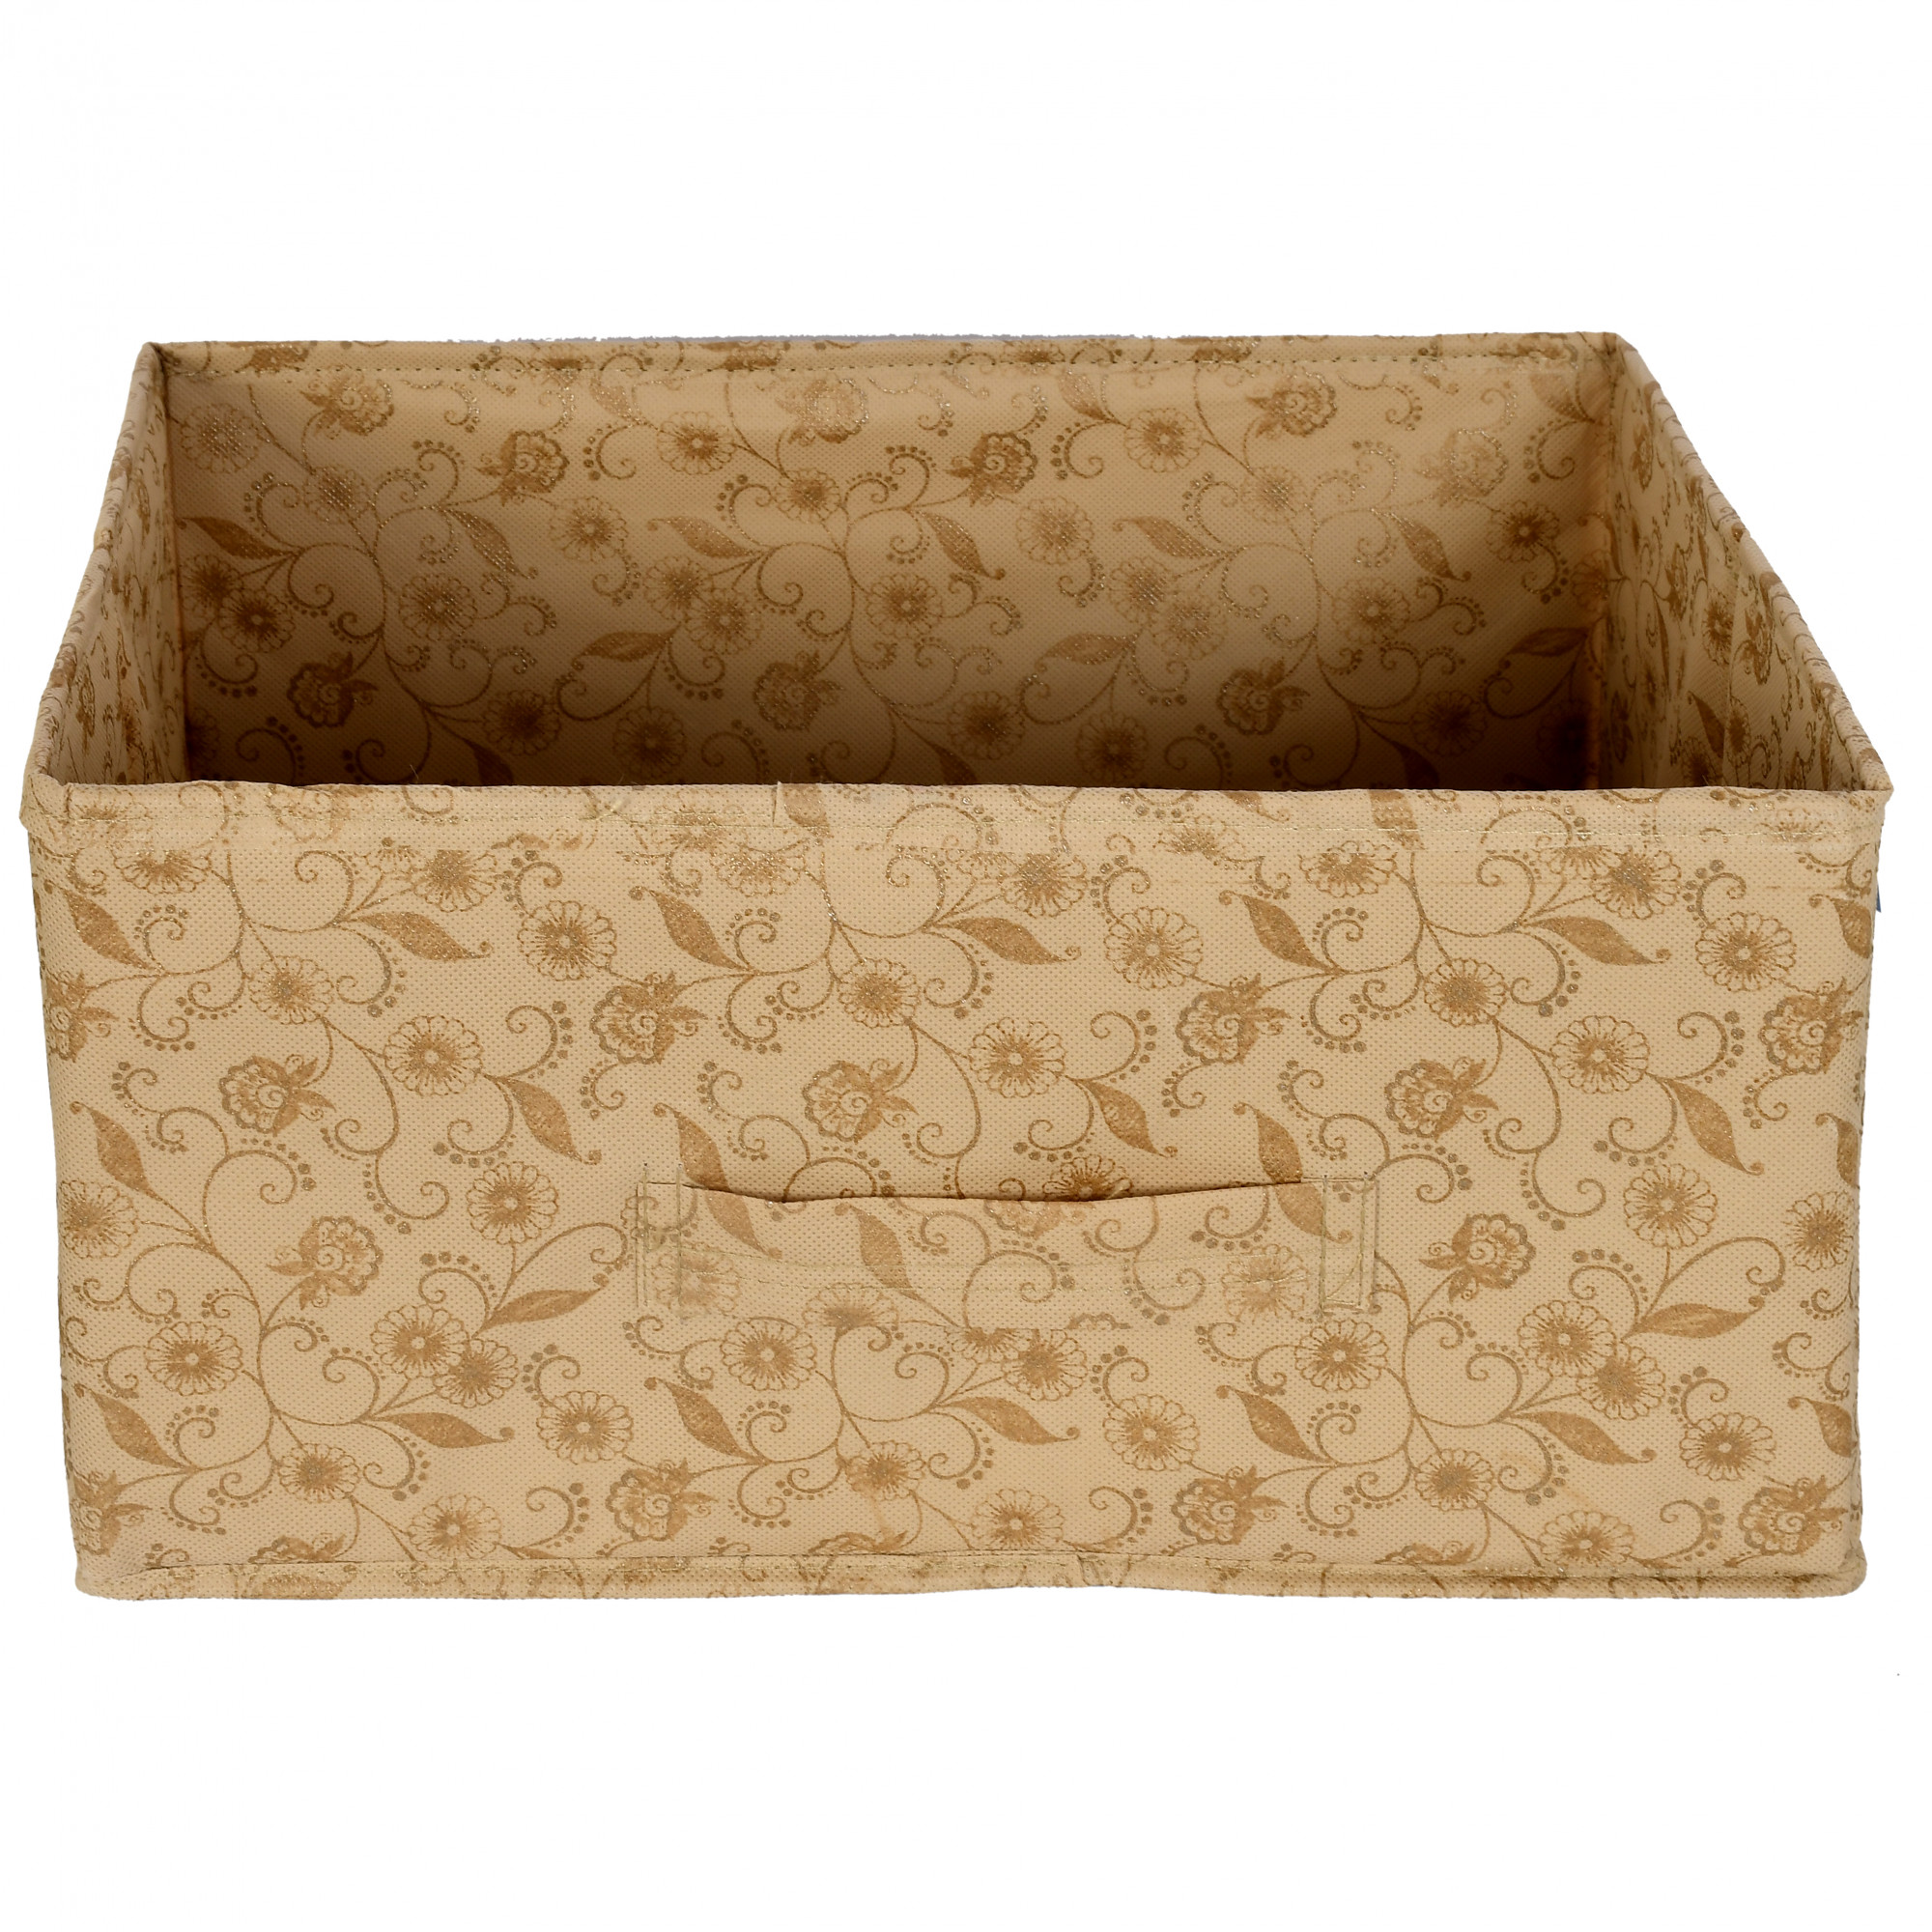 Kuber Industries Metalic Floral Print Non Woven Fabric Drawer Storage And Cloth Organizer Unit for Closet (Beige)-KUBMART1170